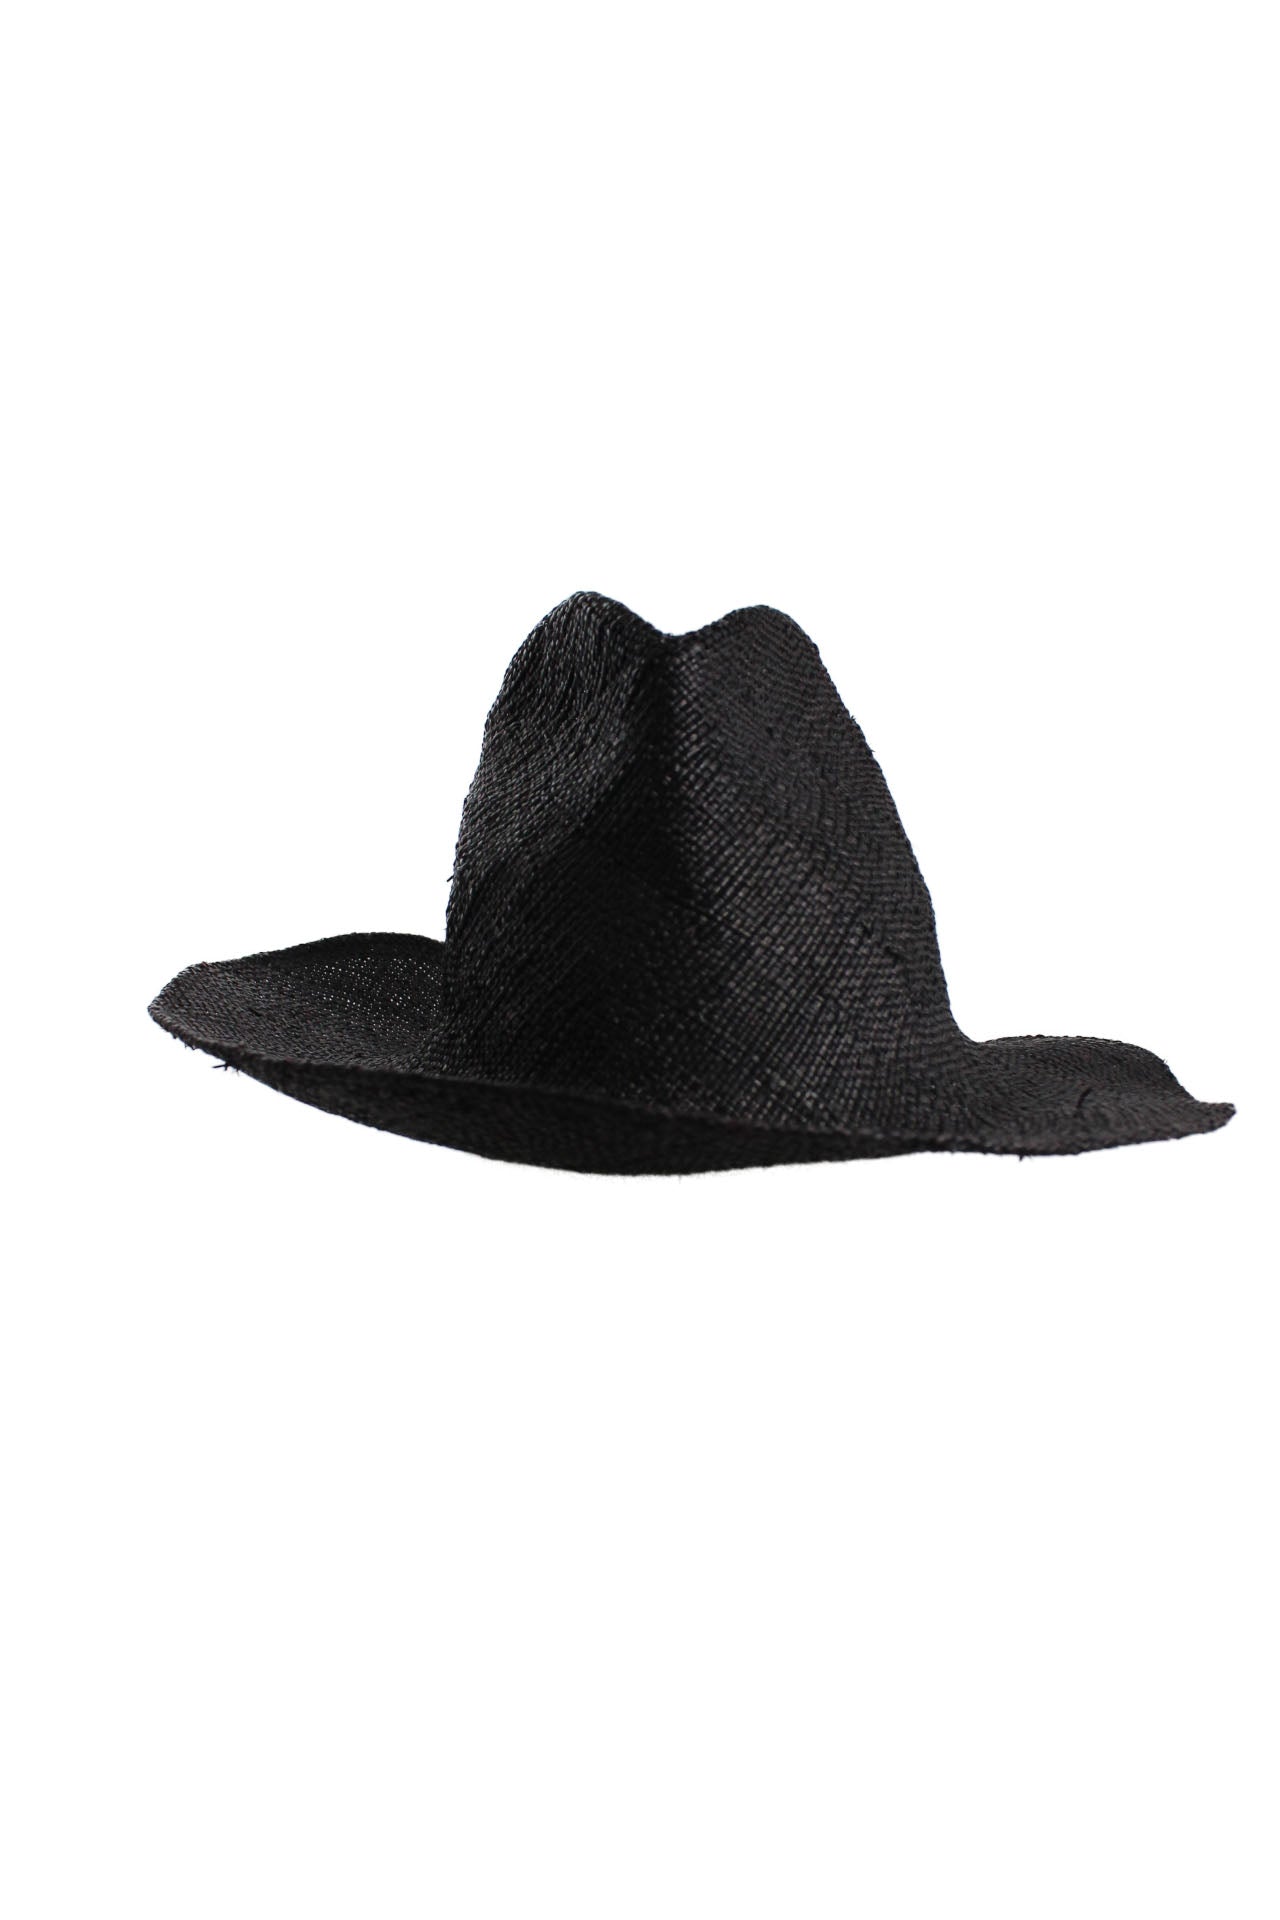 front view of reinhard plank black straw hat. features approximately a 3” brim and ‘reinhard plank’ logo tag at rear of sweatband.